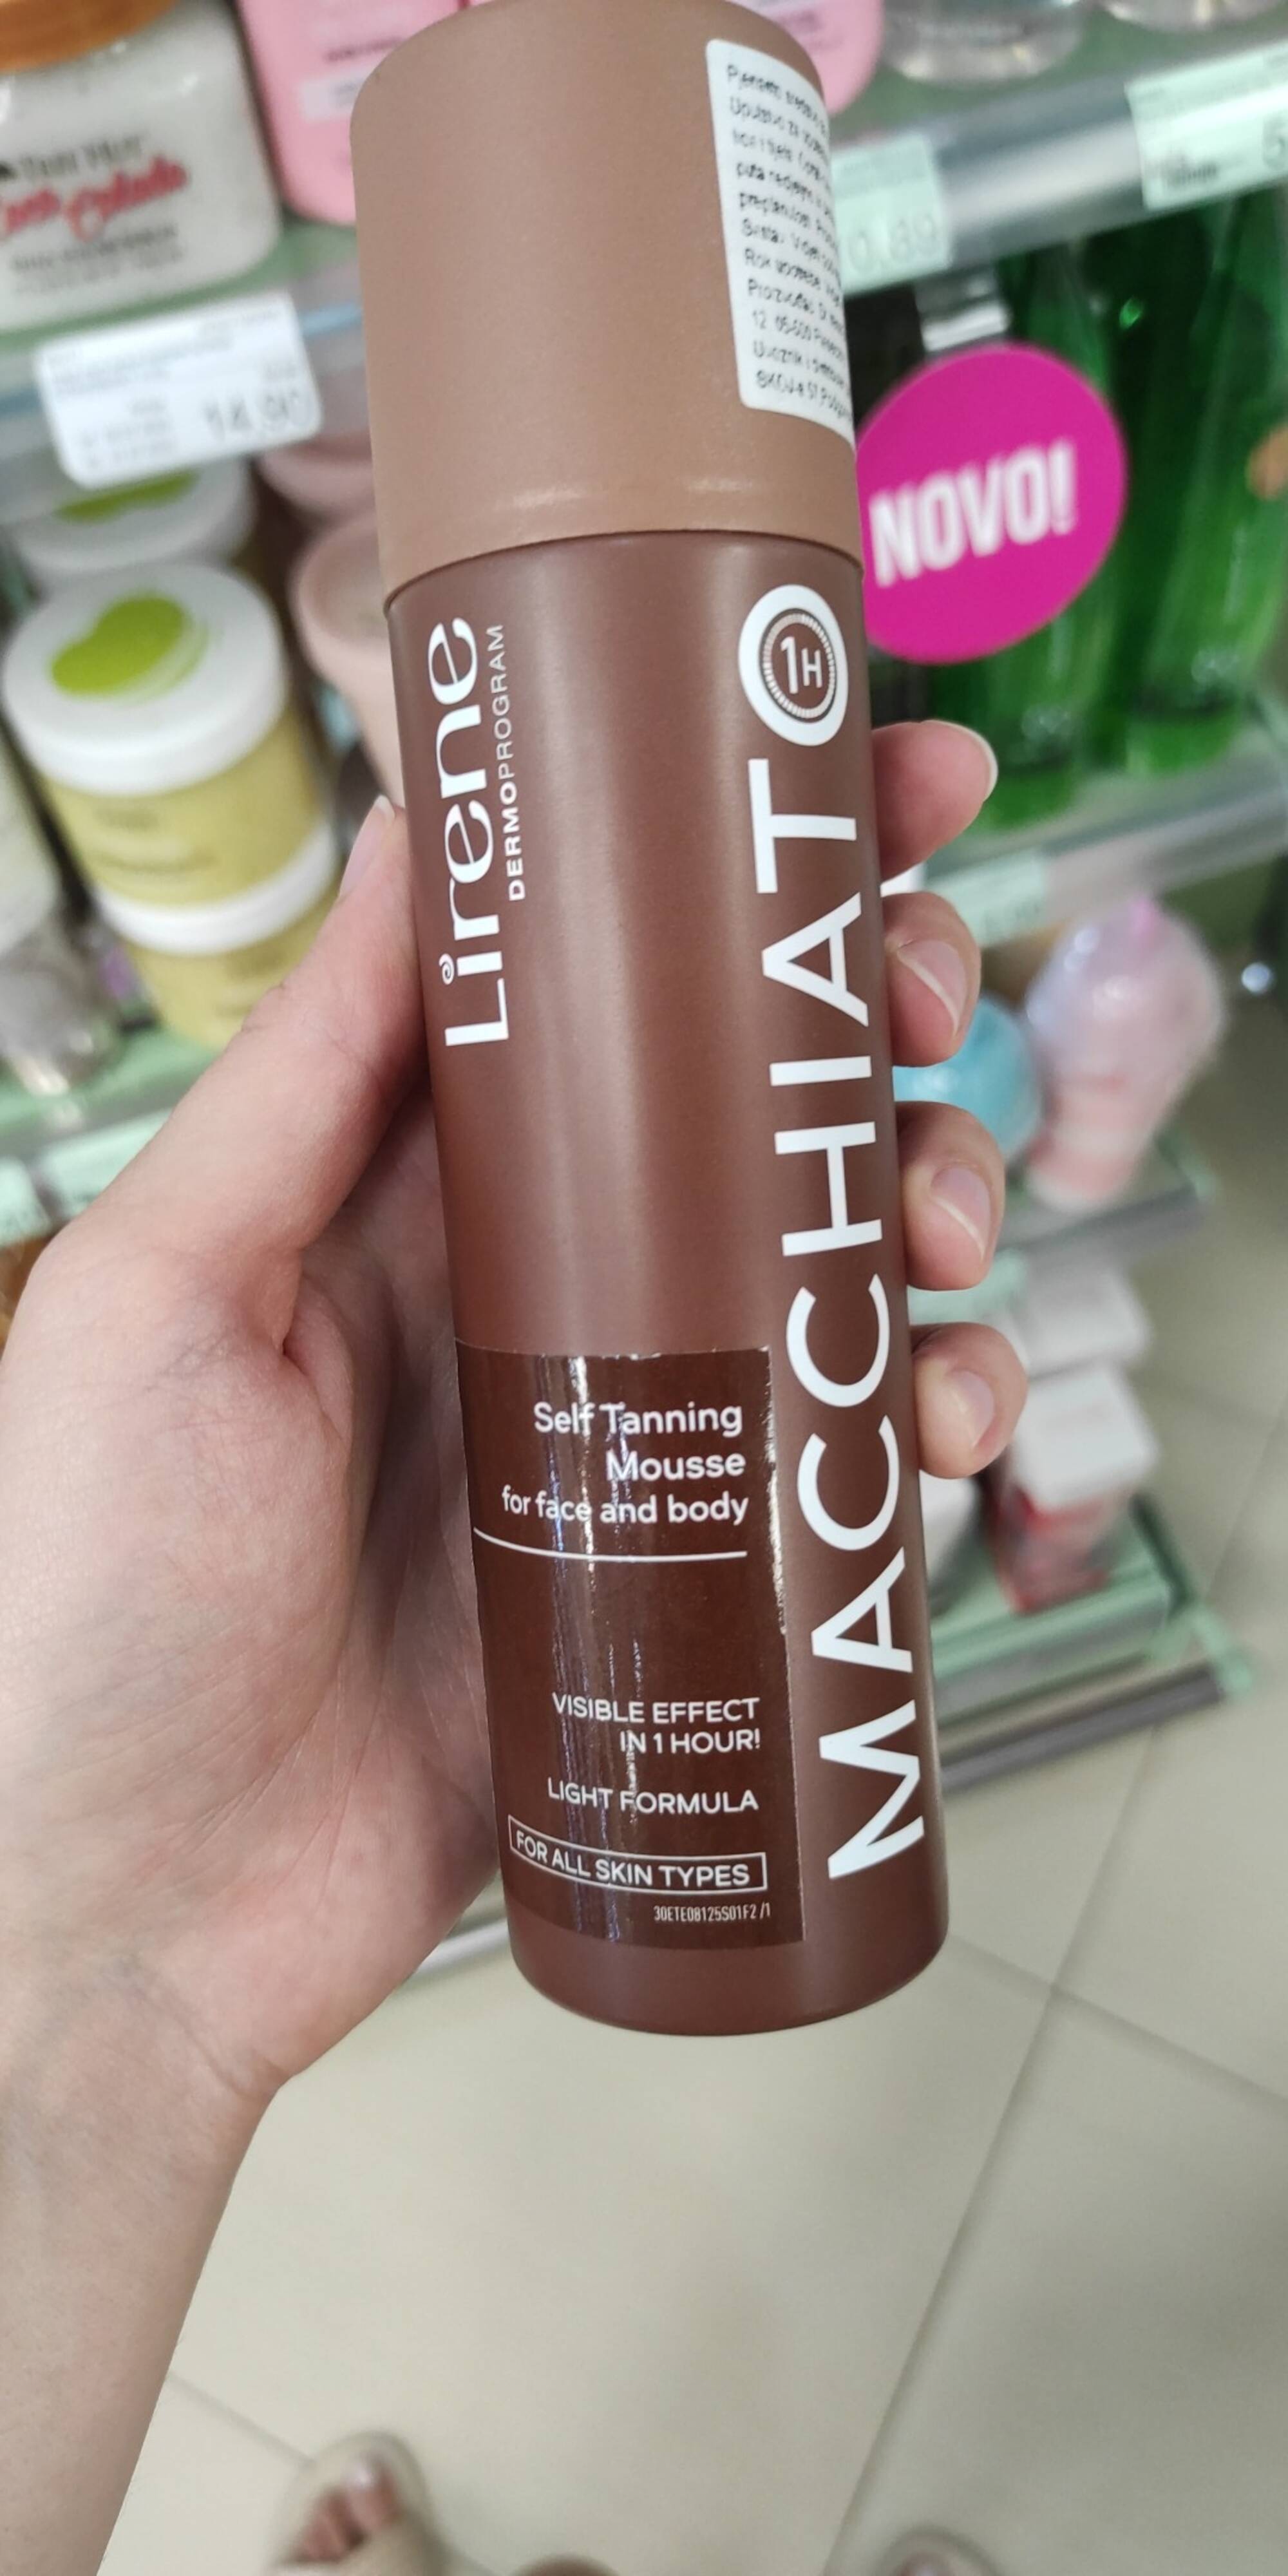 LIRENE - Macchiato - Self-tanning mousse for face and body